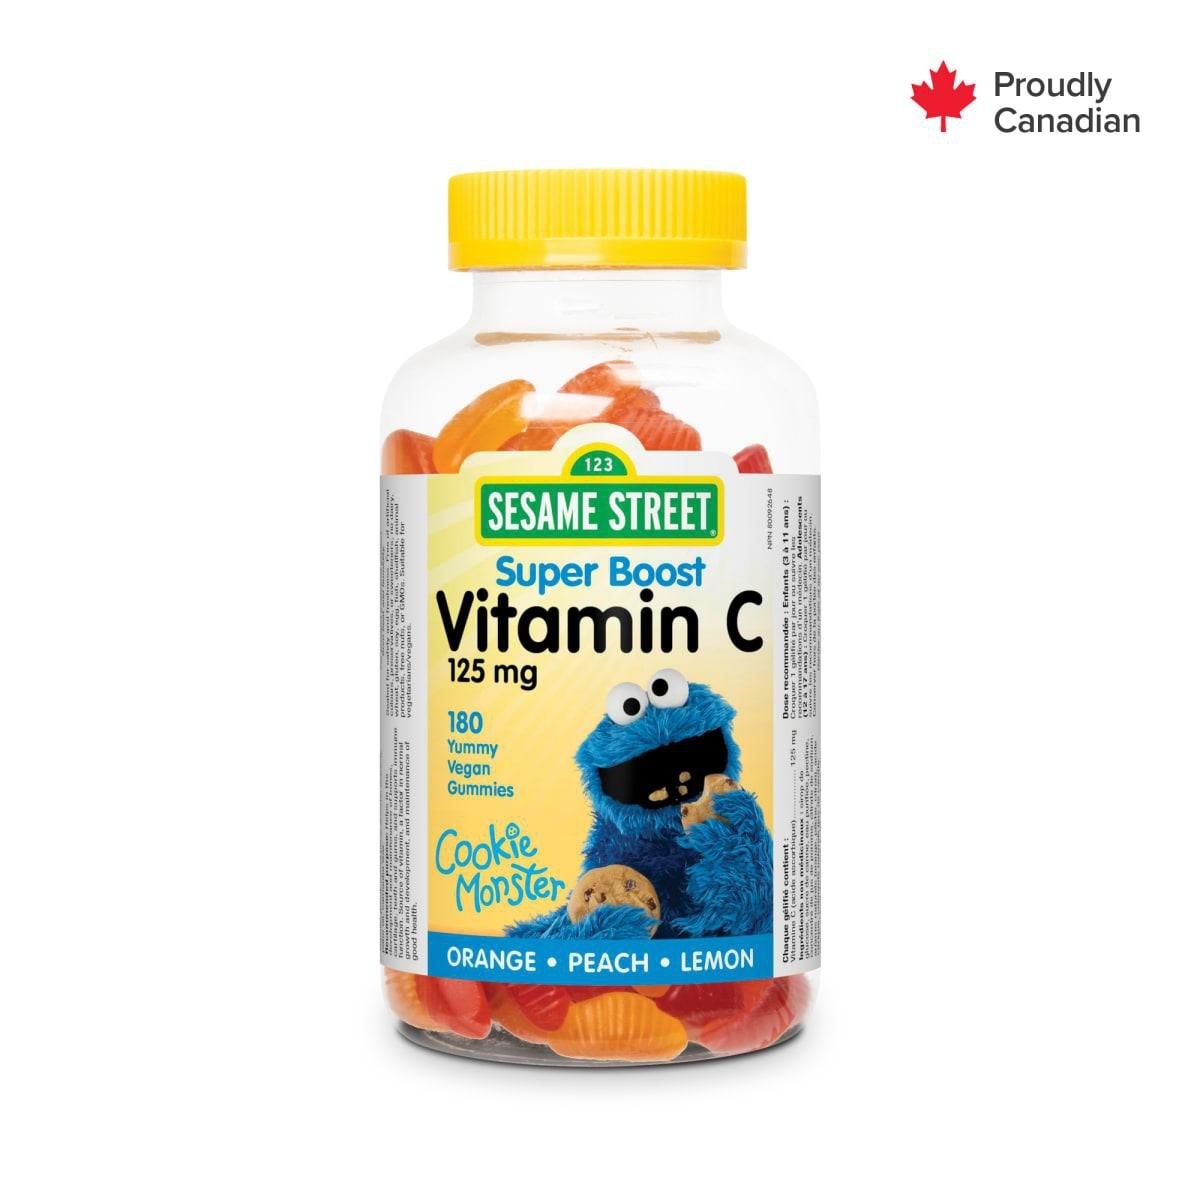 A bottle of Sesame Street Super Boost Vitamin C gummies with cookie monster on the label